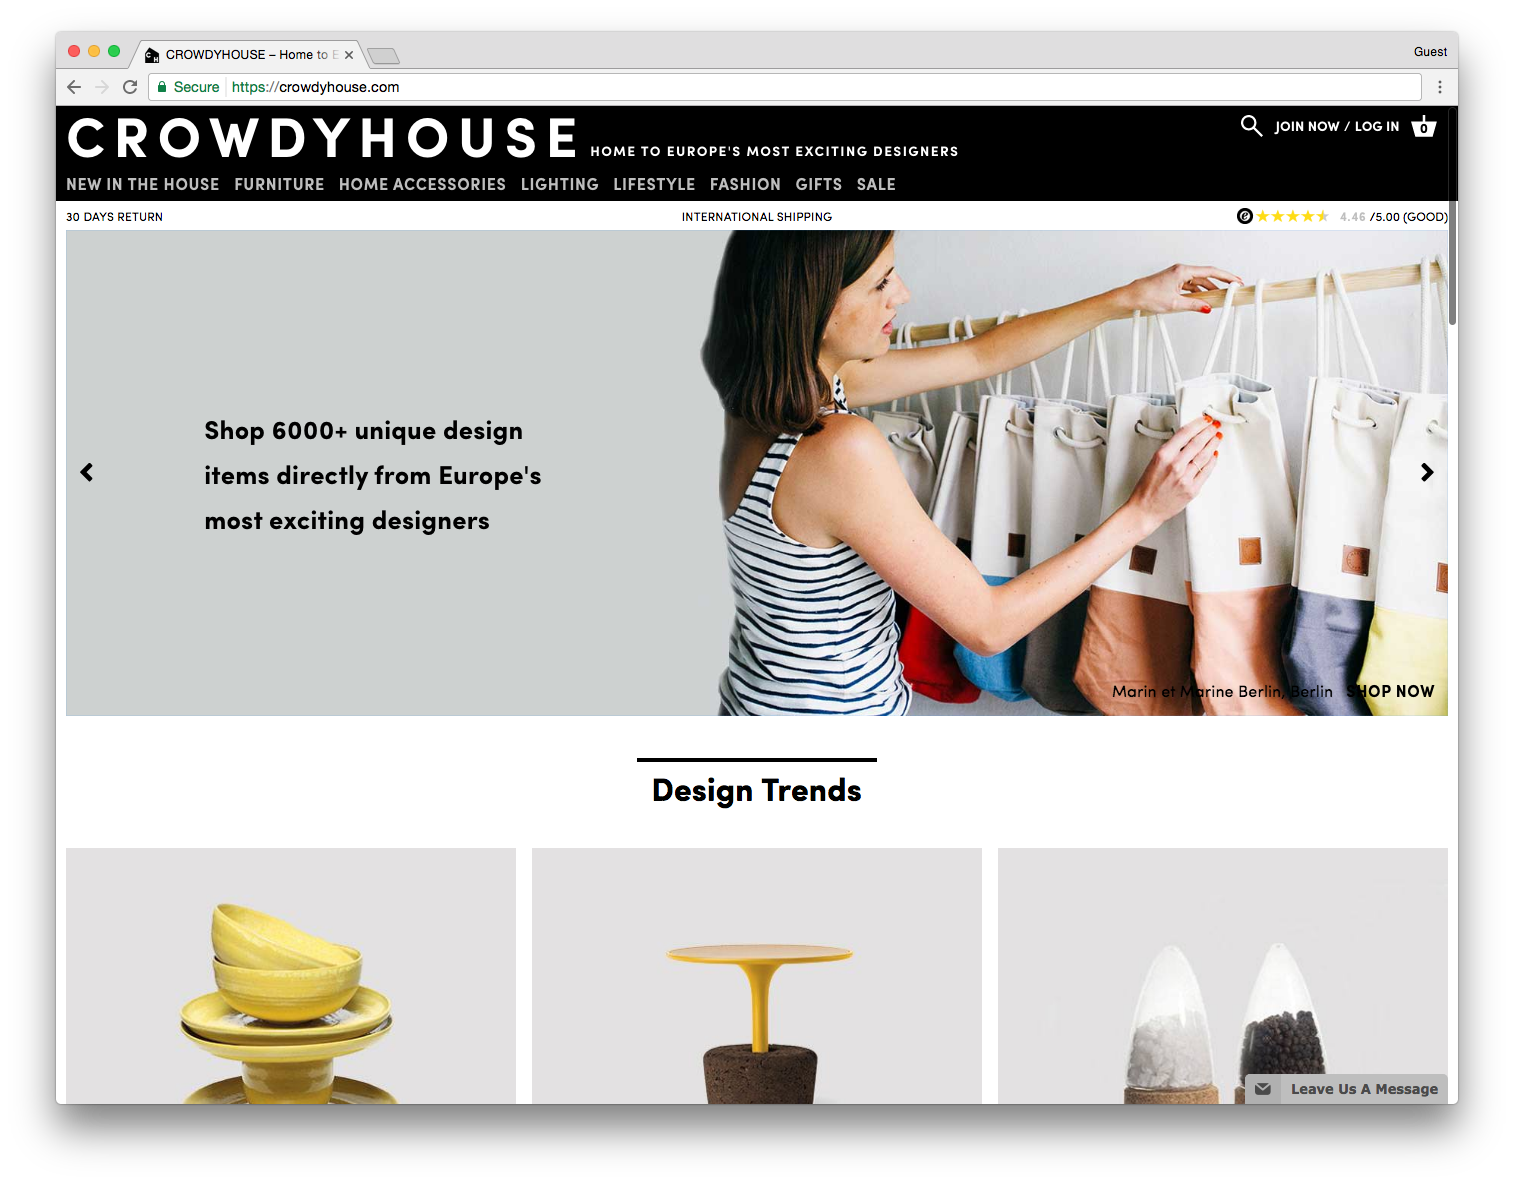 CROWDYHOUSE Home Page